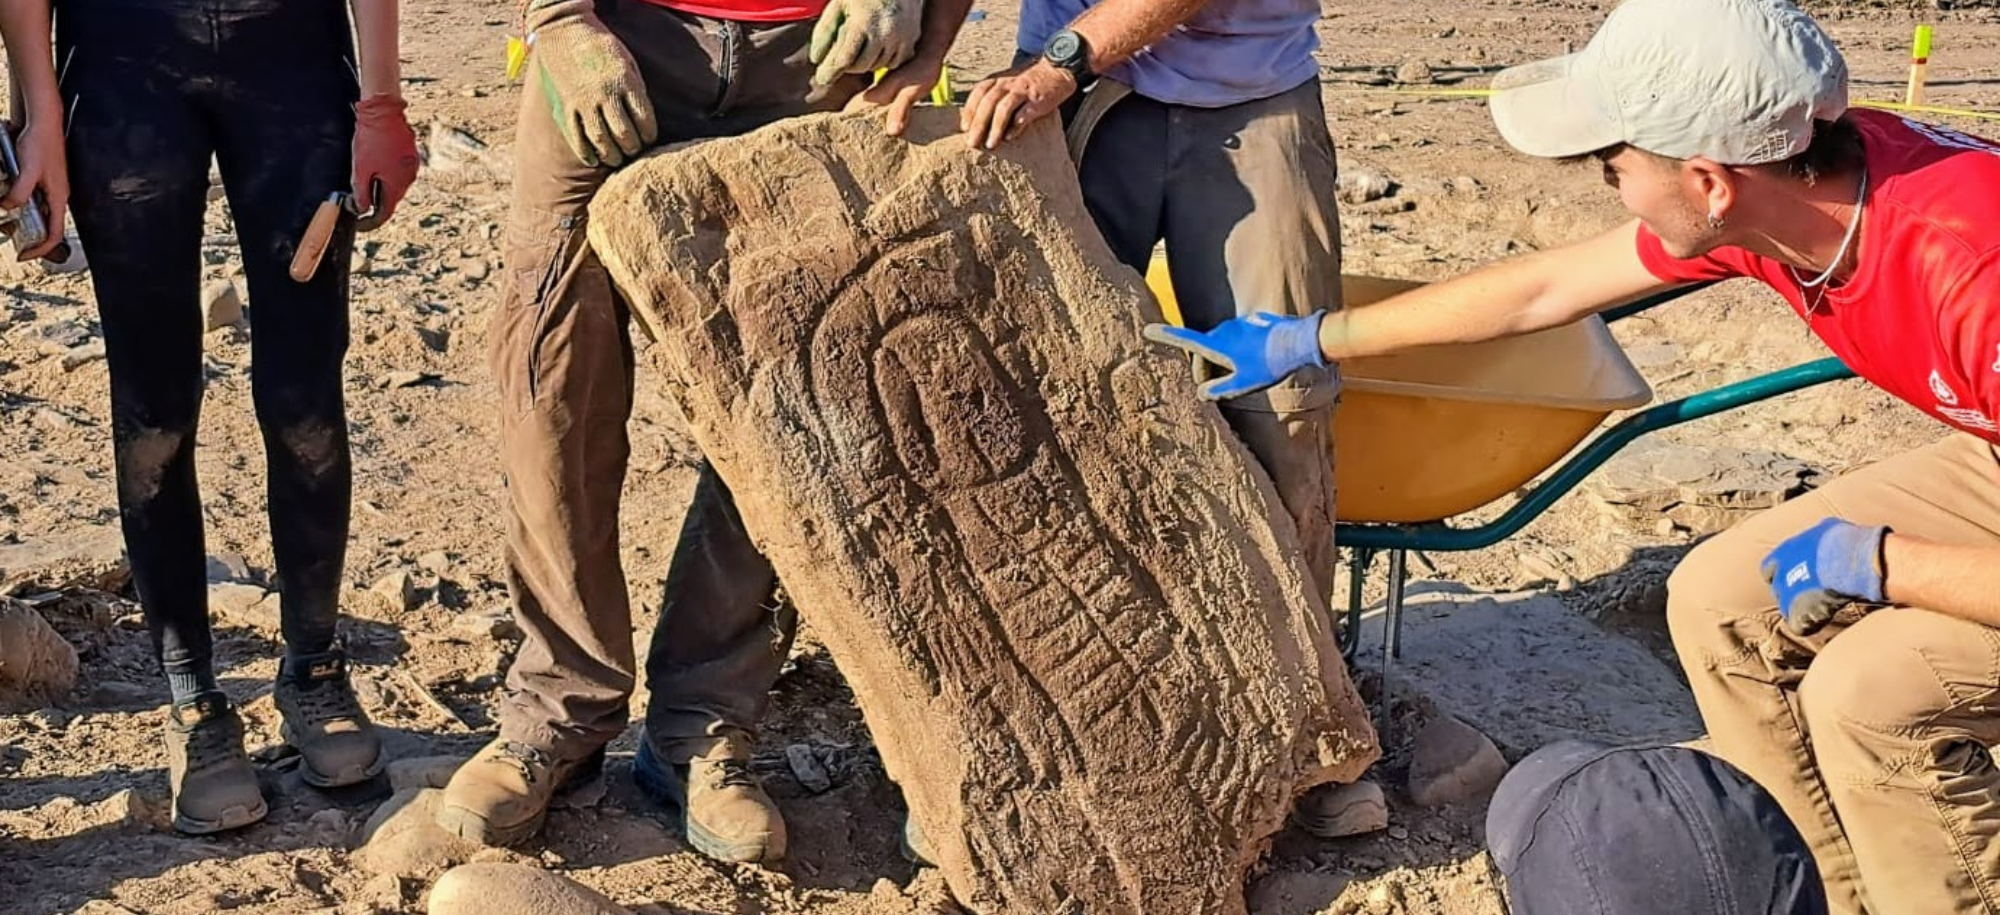 Image shows when the stela, or stone carving, when it was discovered by the archaeological team in Spain.